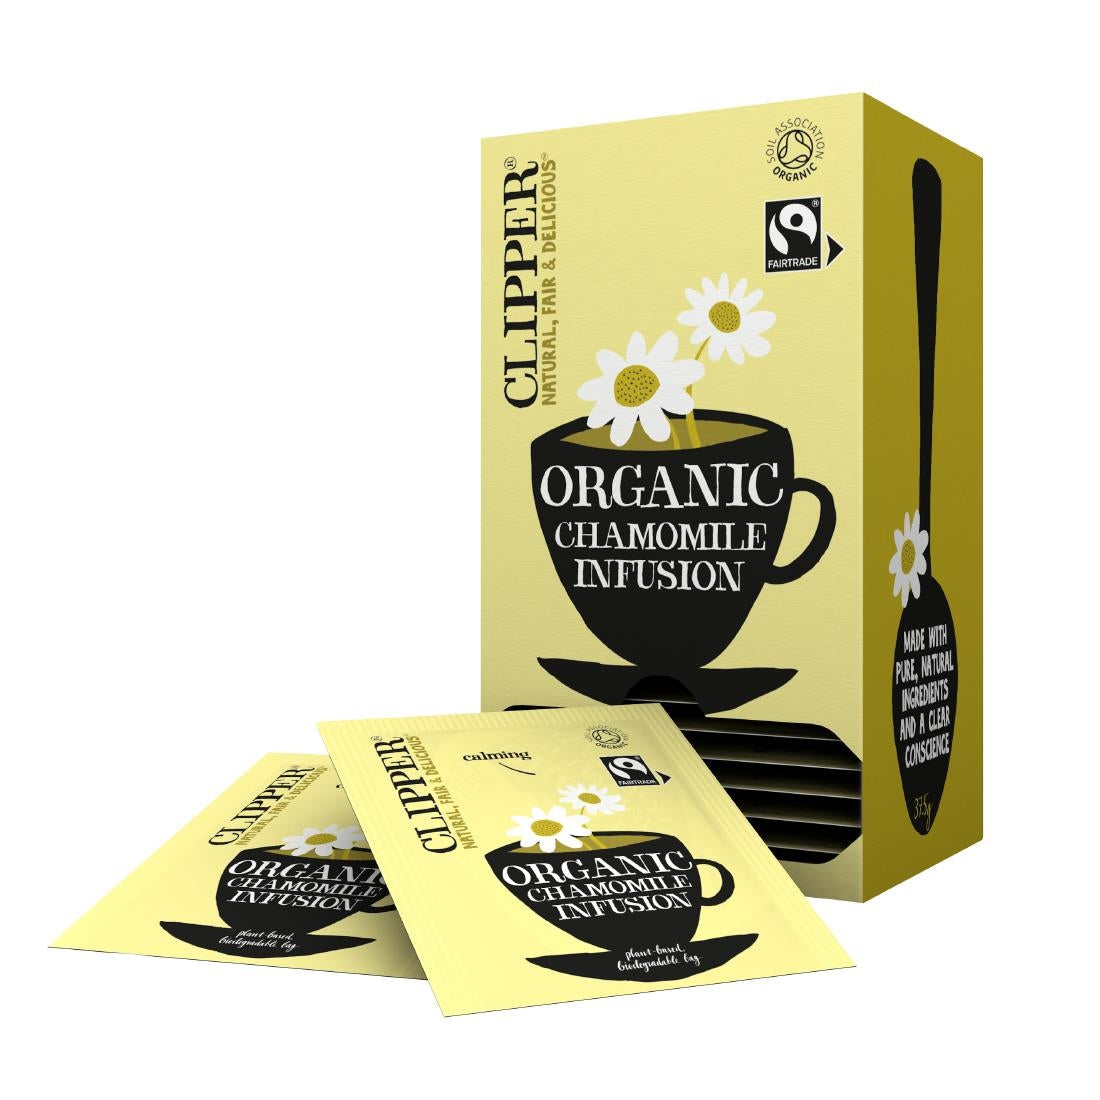 CZ731 Clipper Fairtrade Organic Infusion Chamomile Tea Bag Envelopes (Pack 25) JD Catering Equipment Solutions Ltd